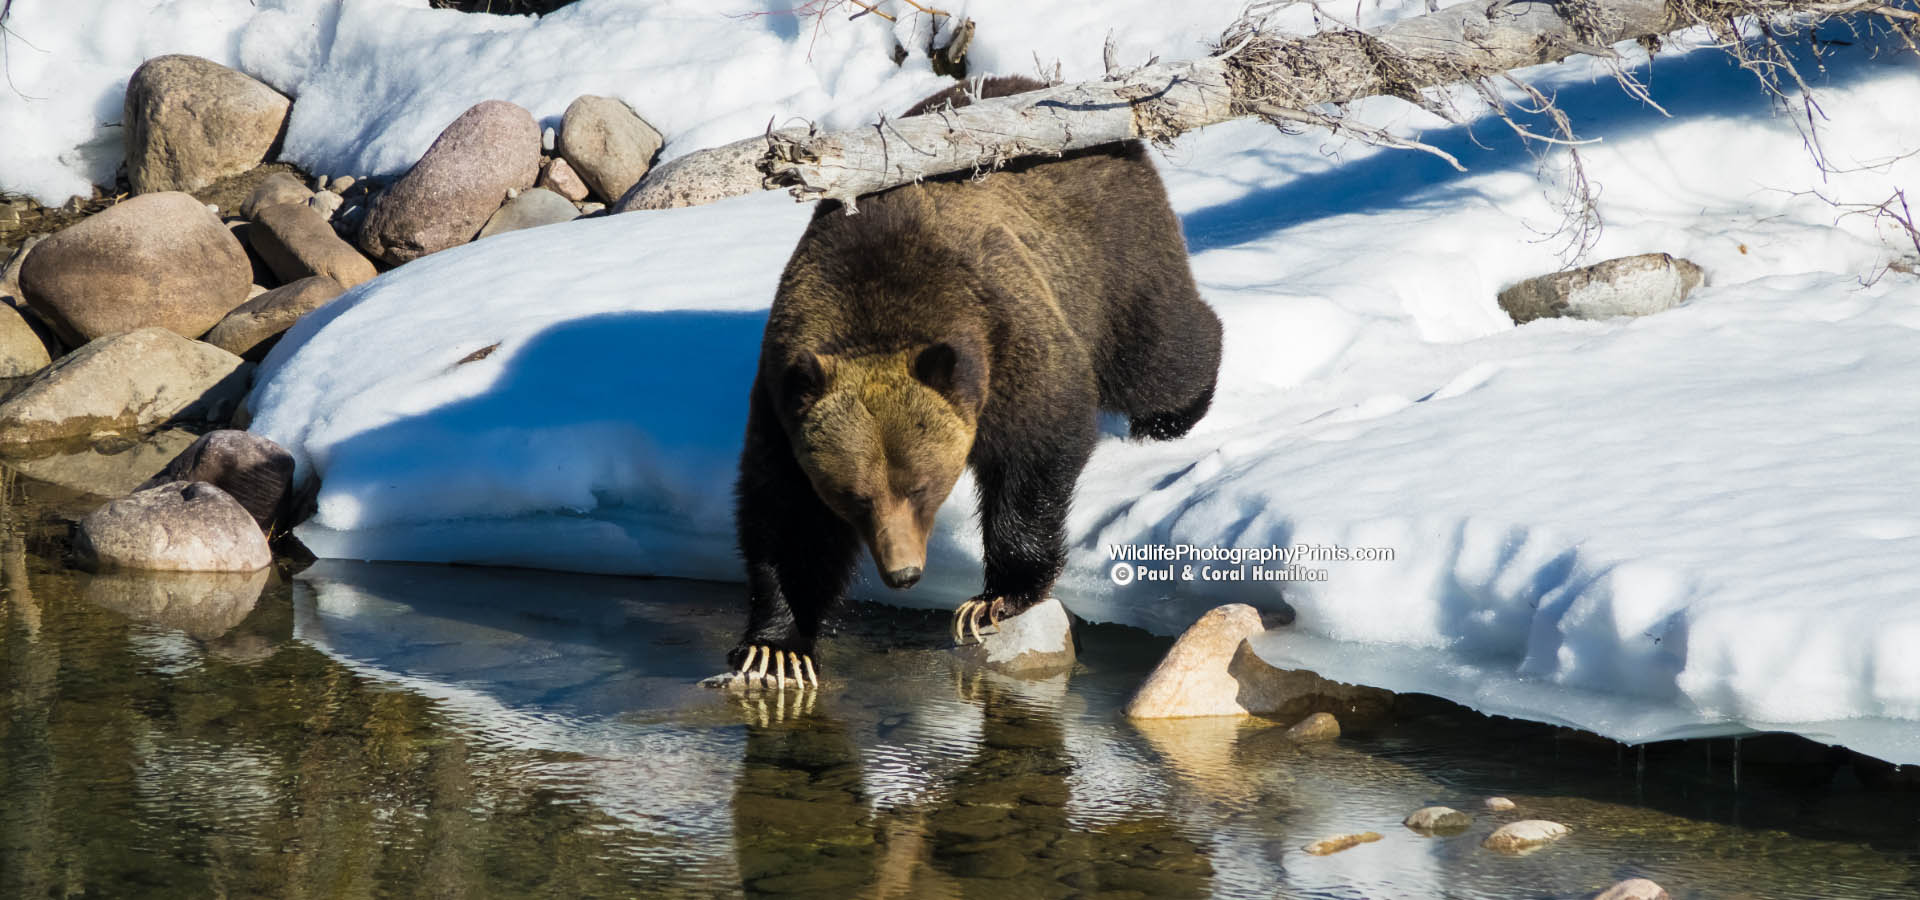 Grizzly Bear Wildlife Photography Prints